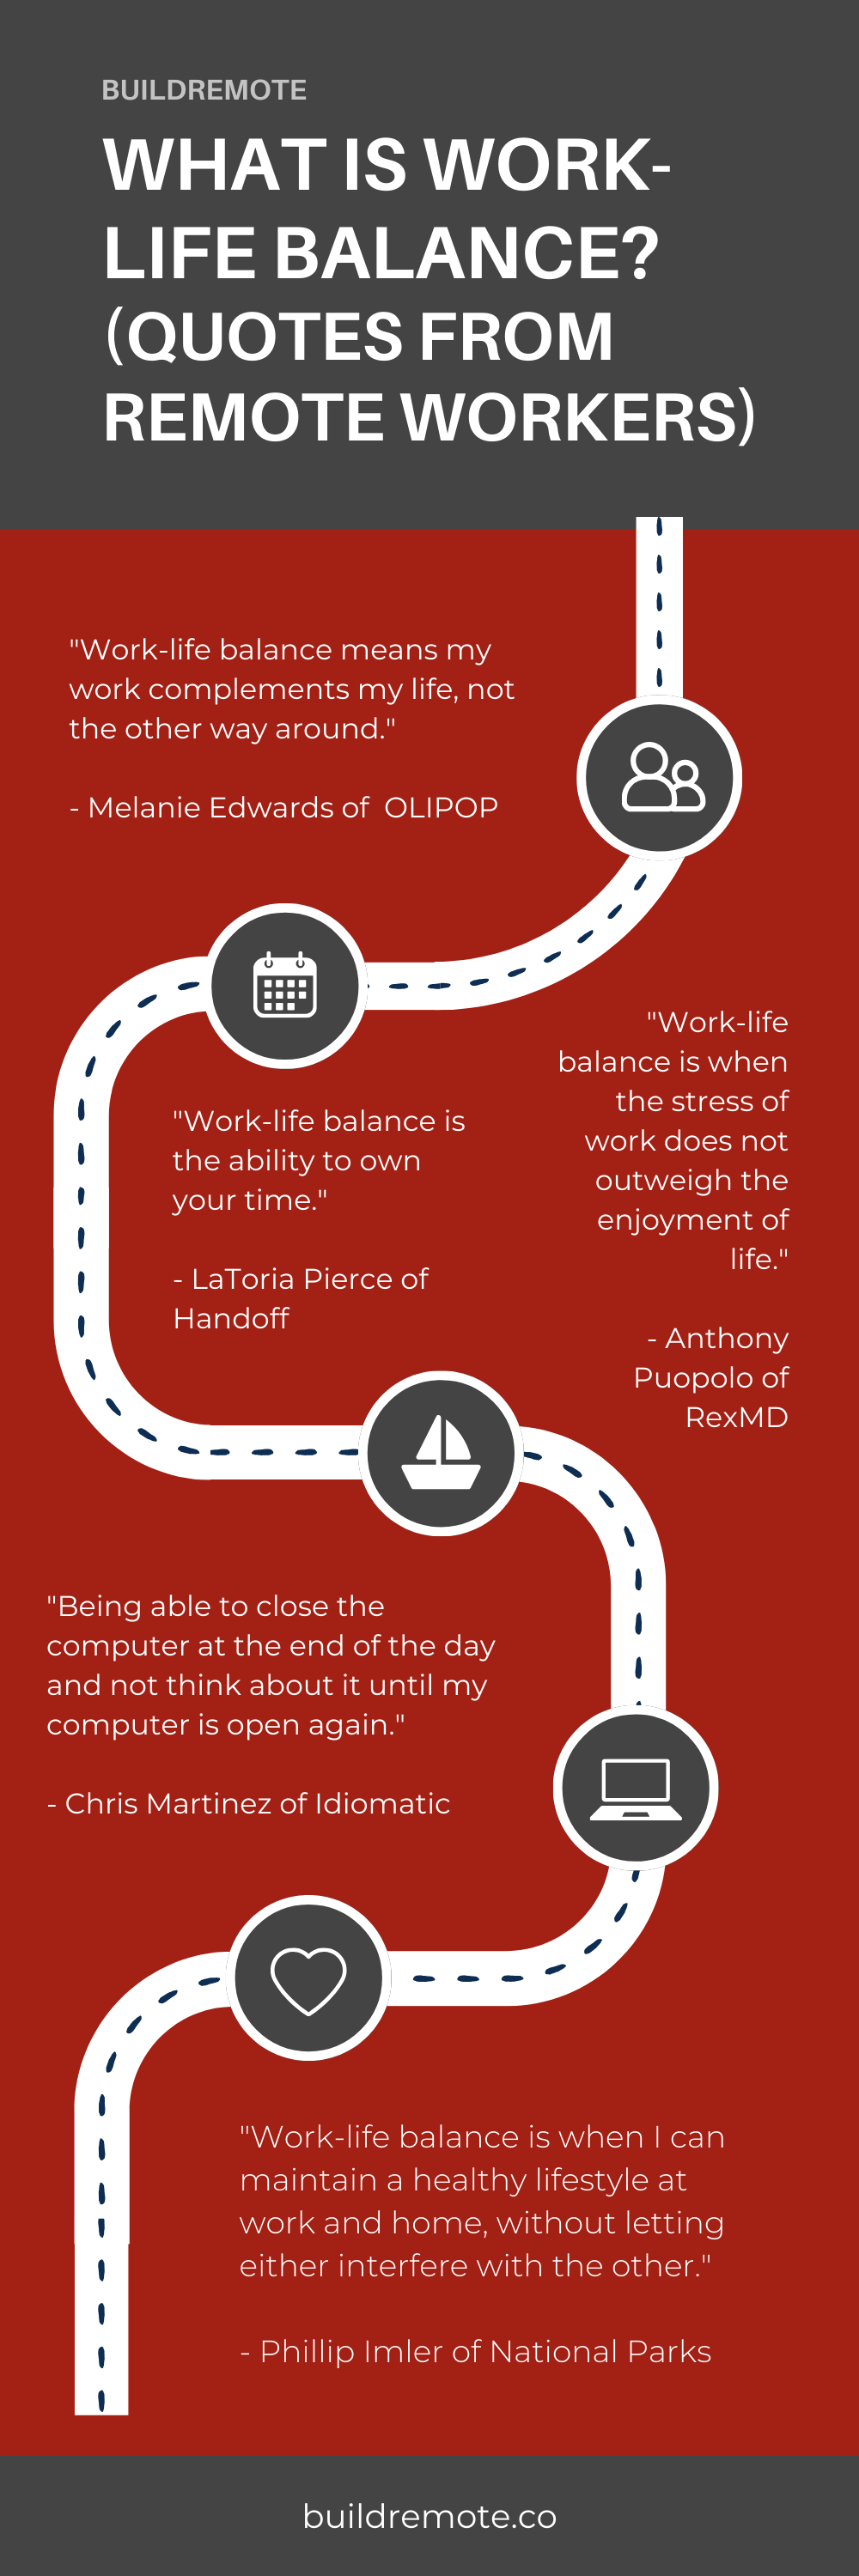 Pinterest Image - What Is Work-Life Balance? (The Statistical Definition)